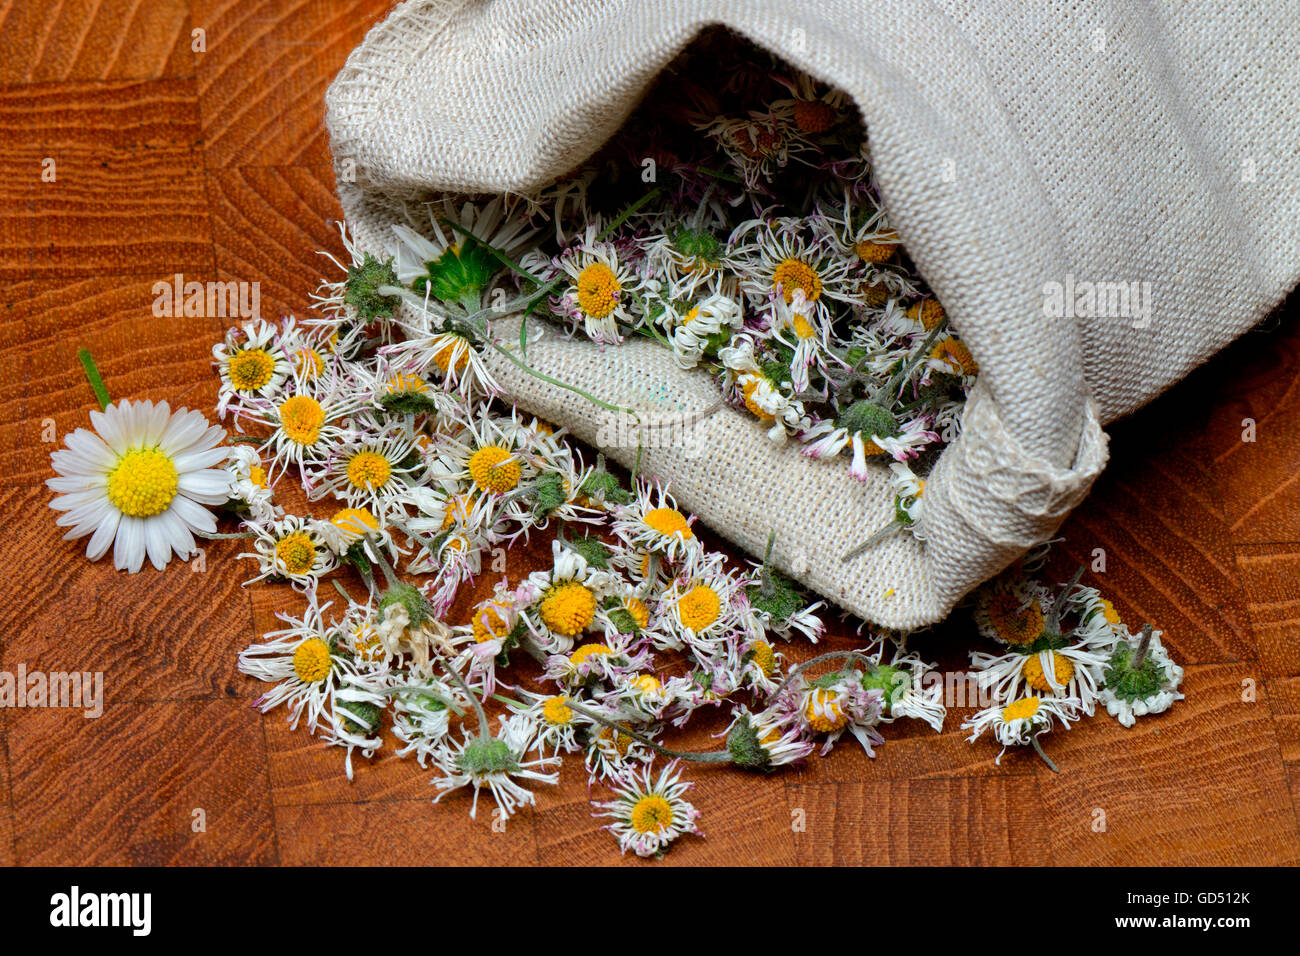 Bag with dried Daisies (Bellis perennis) Stock Photo